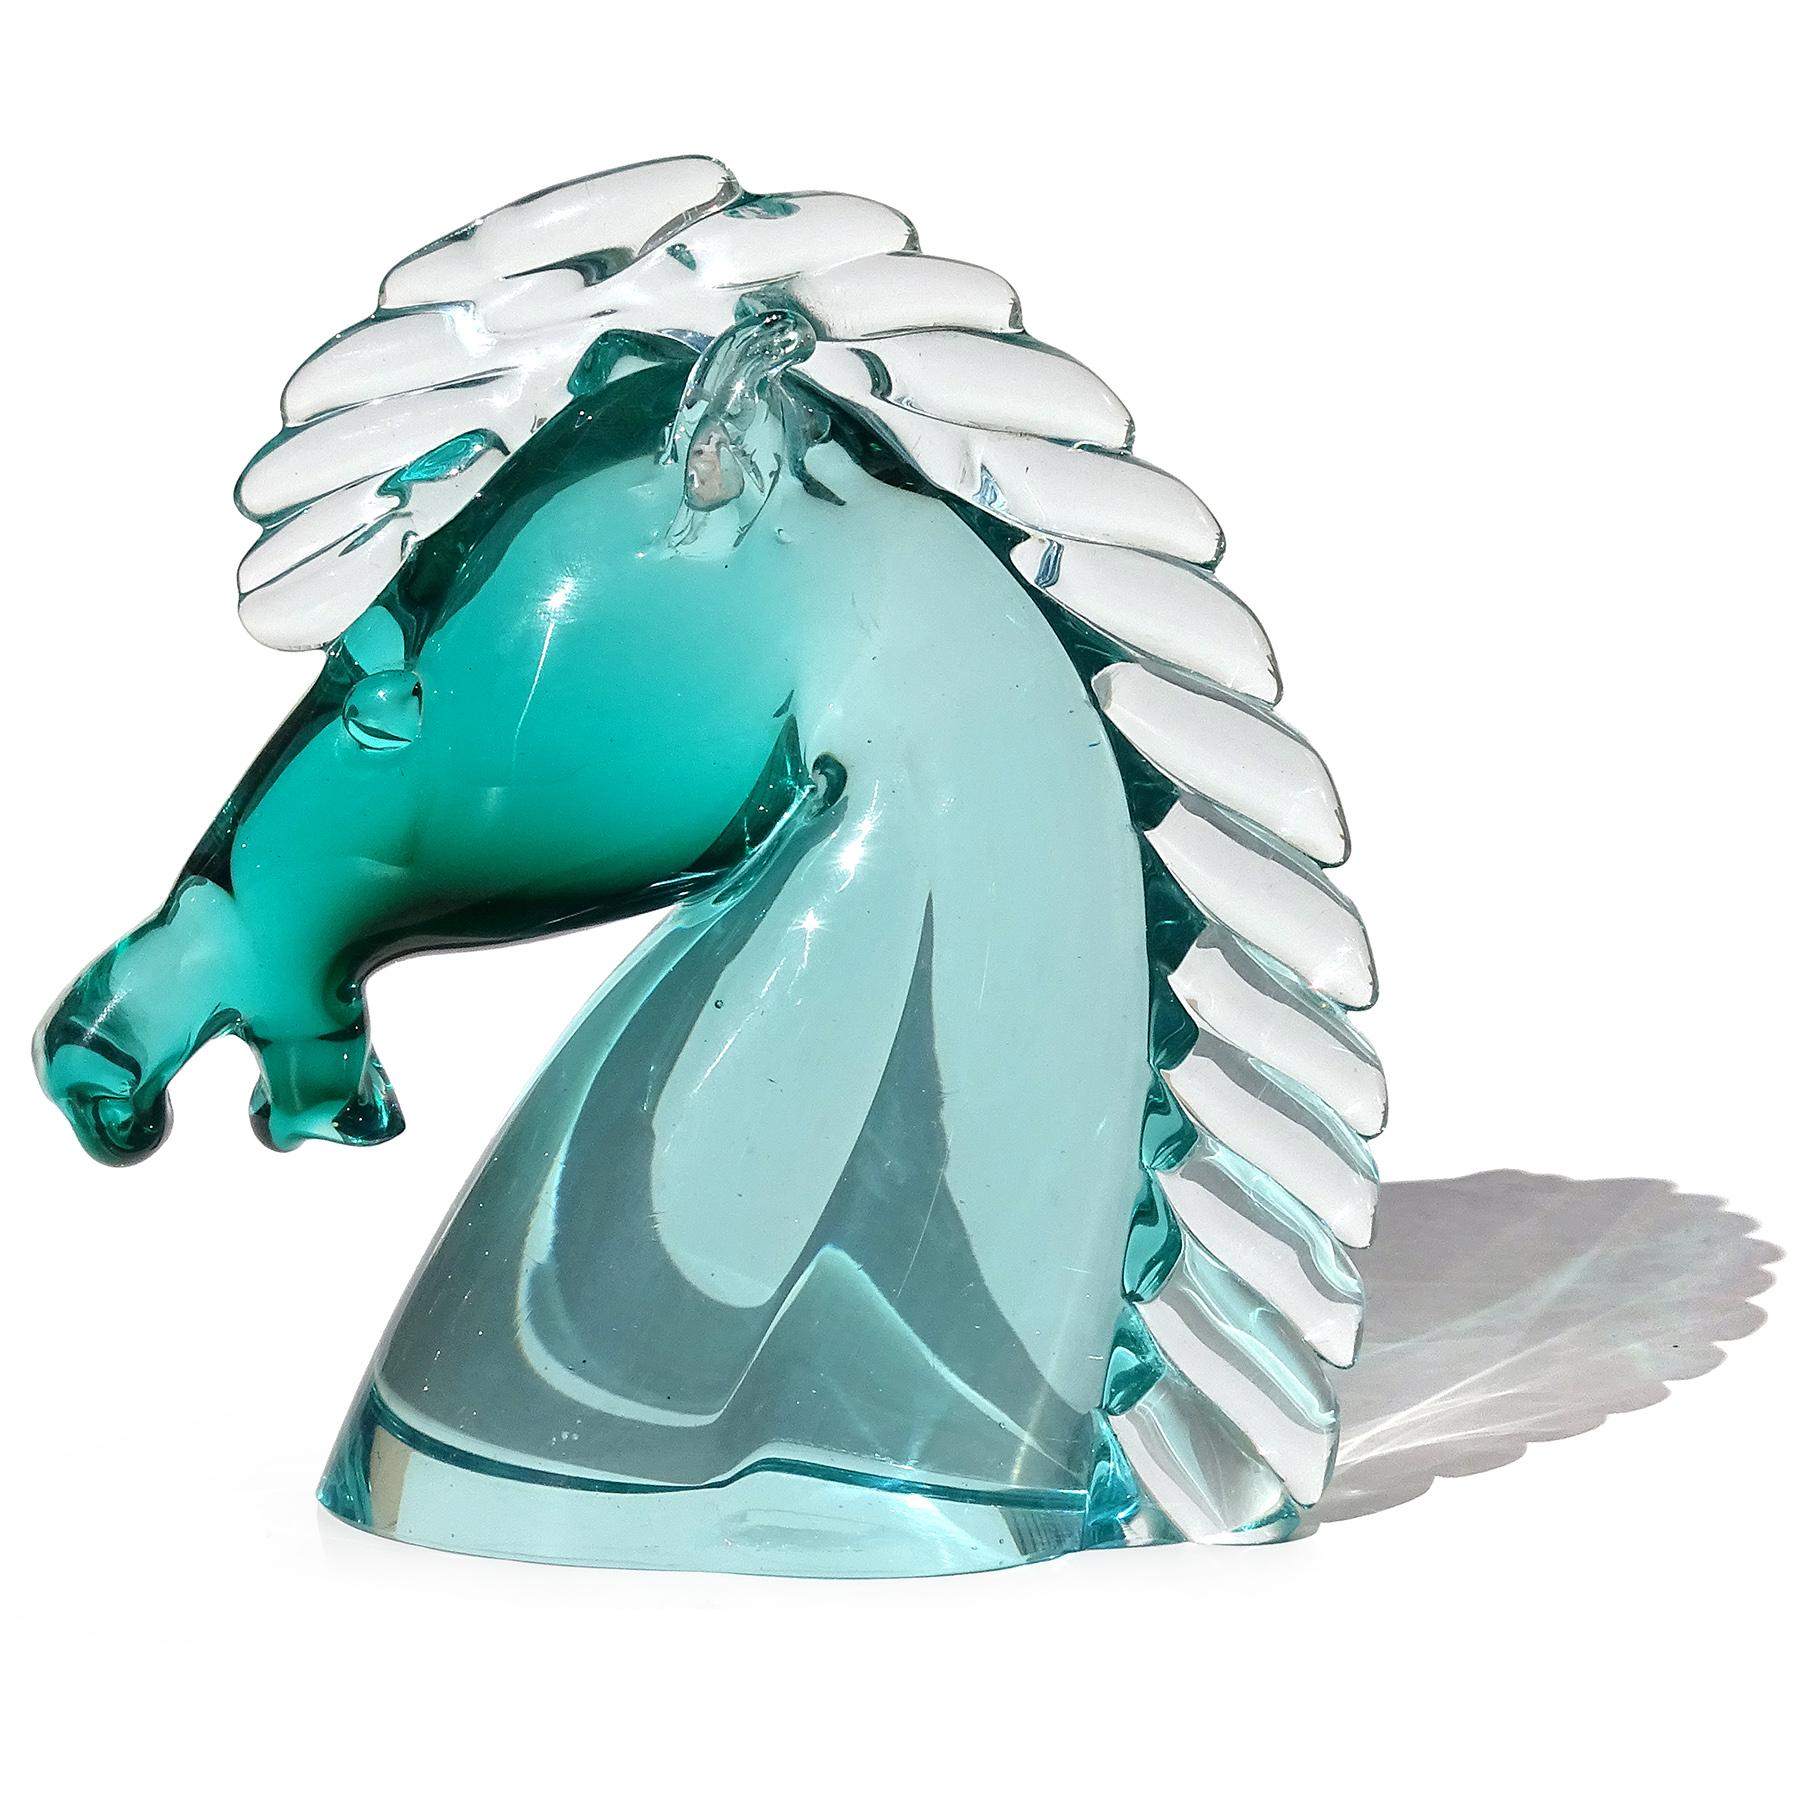 Beautiful vintage Murano hand blown Sommerso green to clear Italian art glass horse head sculpture. The figure is documented to designer Archimede Seguso, circa 1950s. It still retains an original (but worn) 